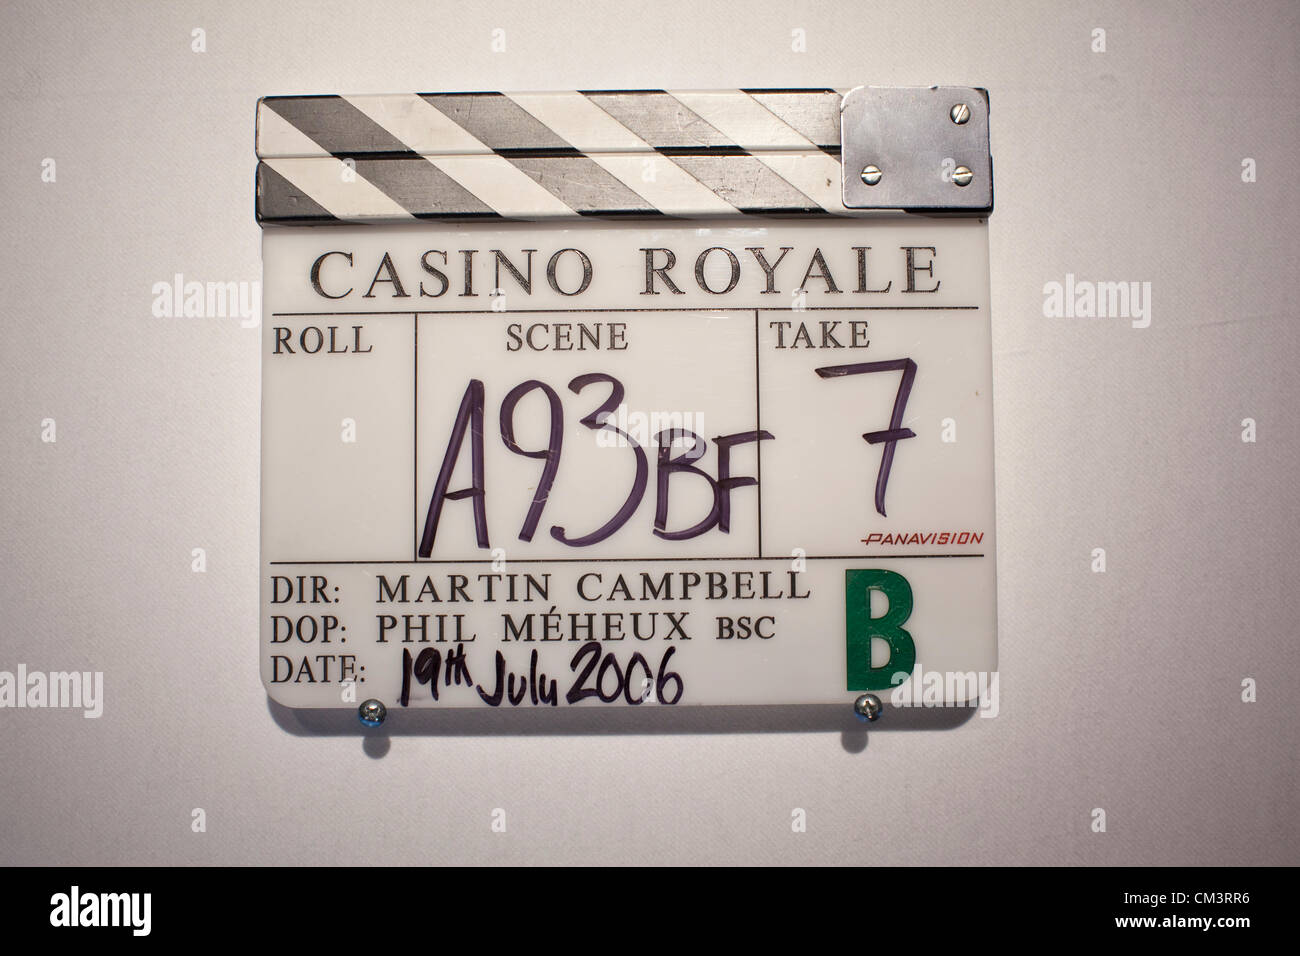 50 Years of James Bond The Auction at Christie's, London, UK 28.09.2012 To celebrate the 50th anniversary of James Bond on film, Christie's announces 50 Years of James Bond - The Auction, presenting the opportunity to acquire Bond memorabilia. Here  - A clapperboard used during the filming of 'Casino Royale' (2006) to be auctioned at Christie's online between 29th September until 5th October. Stock Photo